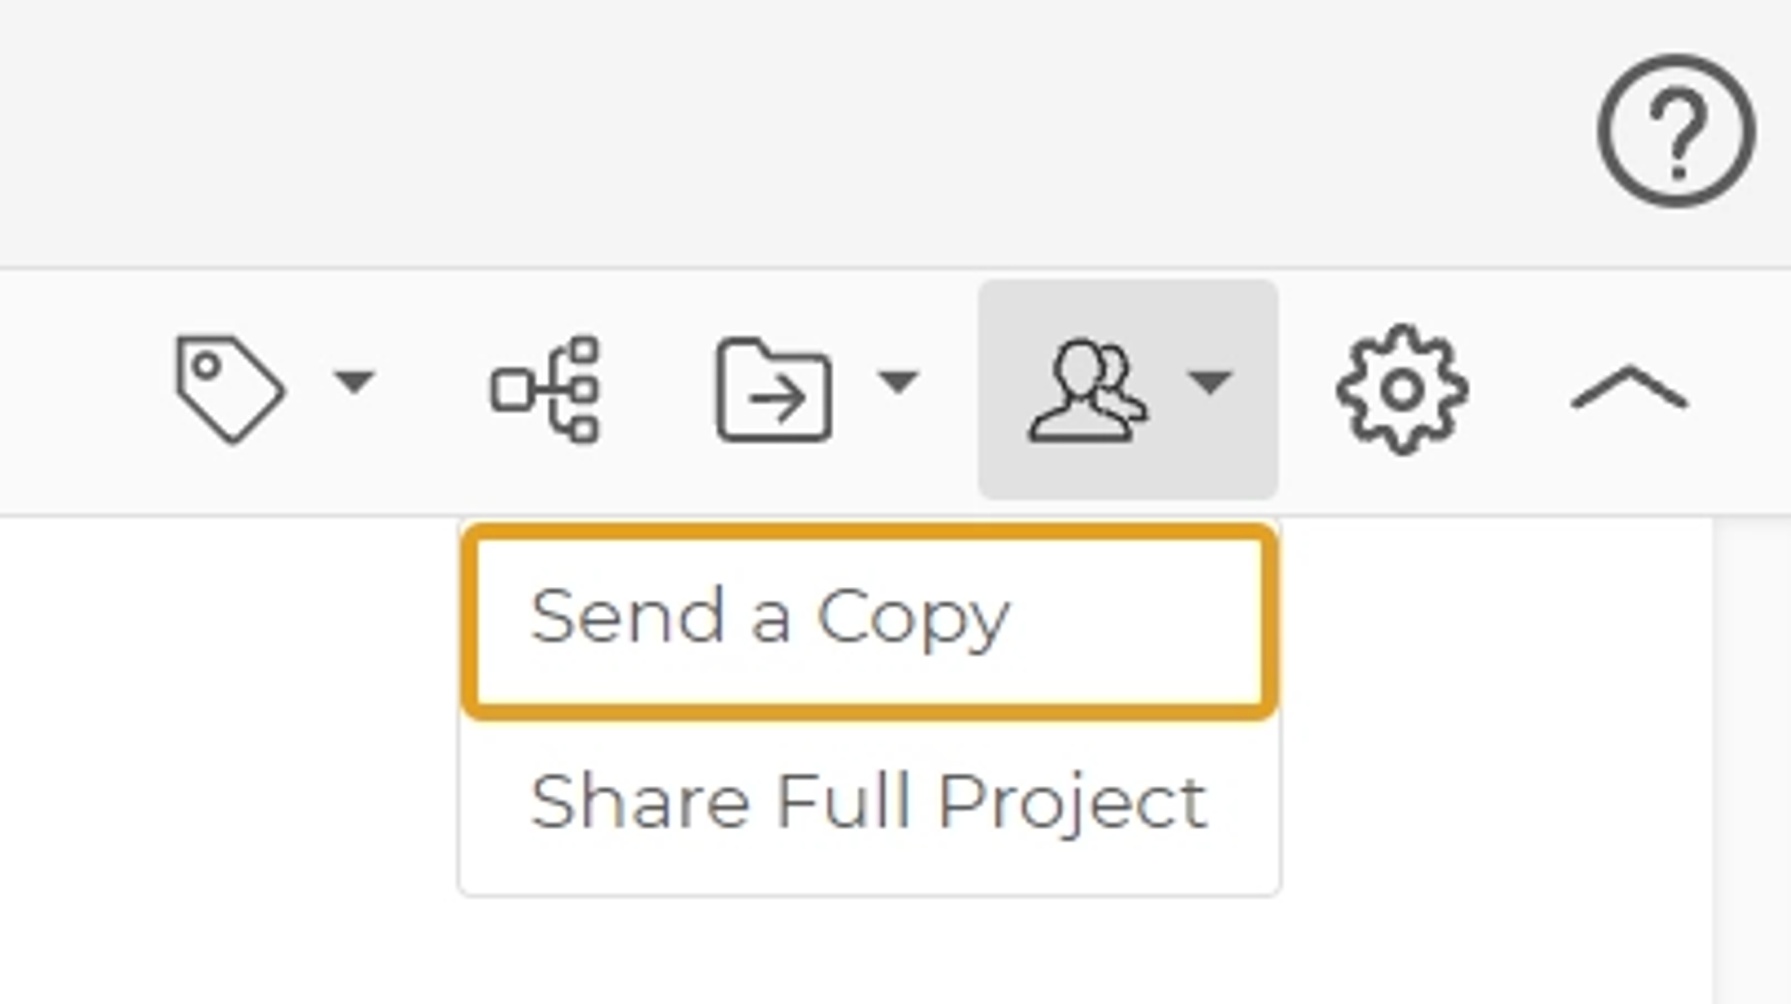 Choose option "Send a Copy" from the drop down.